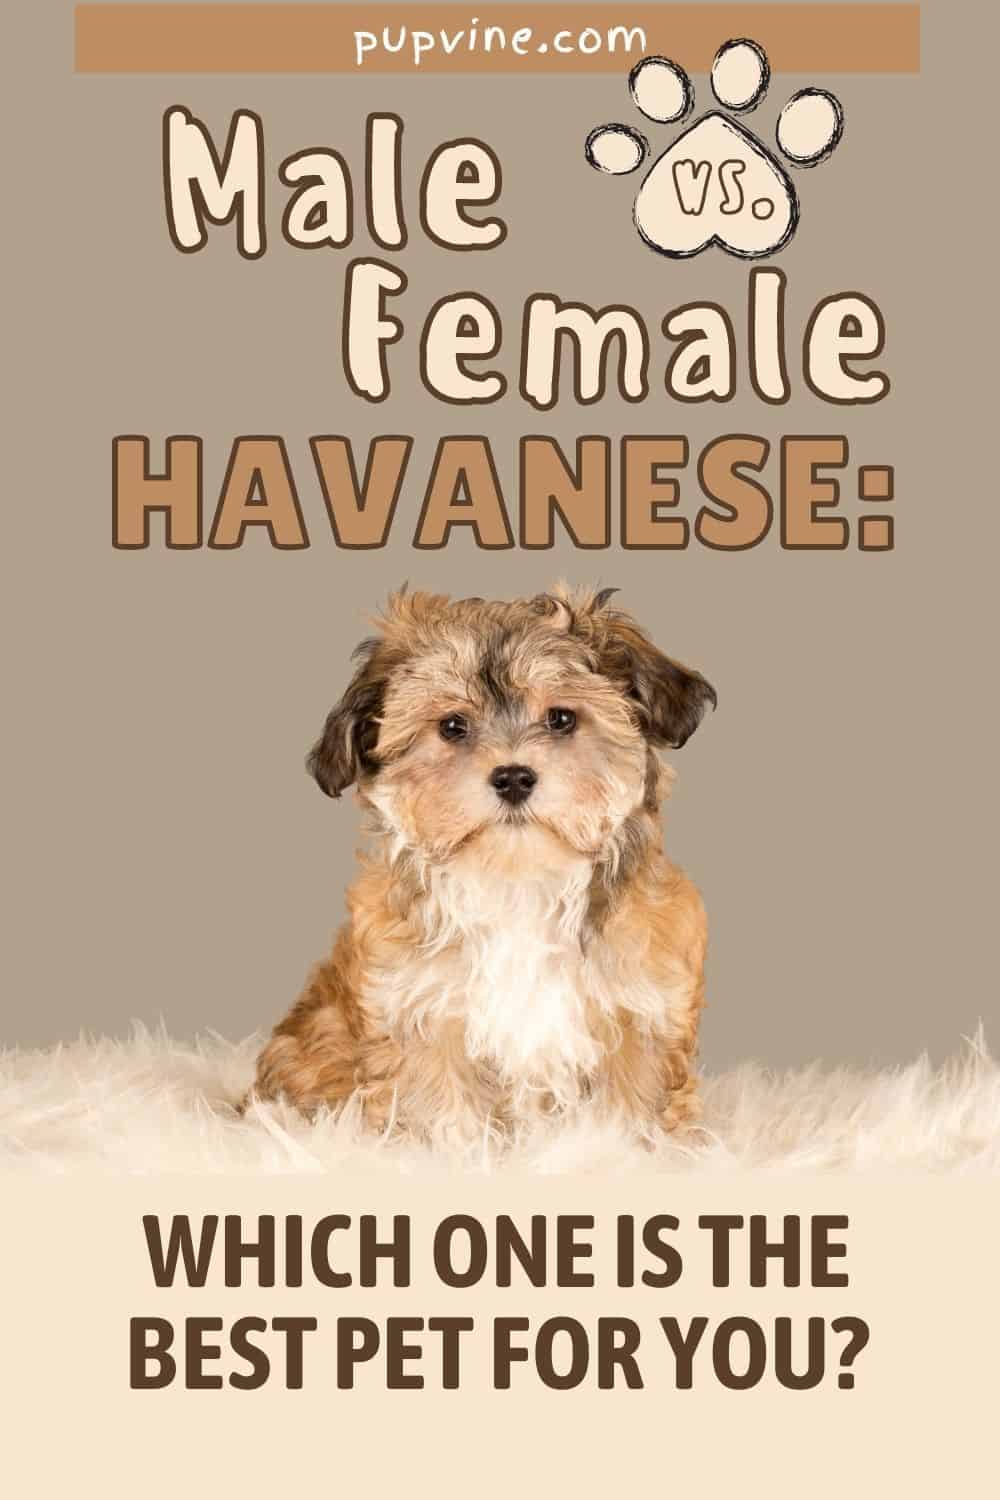 Male Vs. Female Havanese: Which One Is The Best Pet For You?